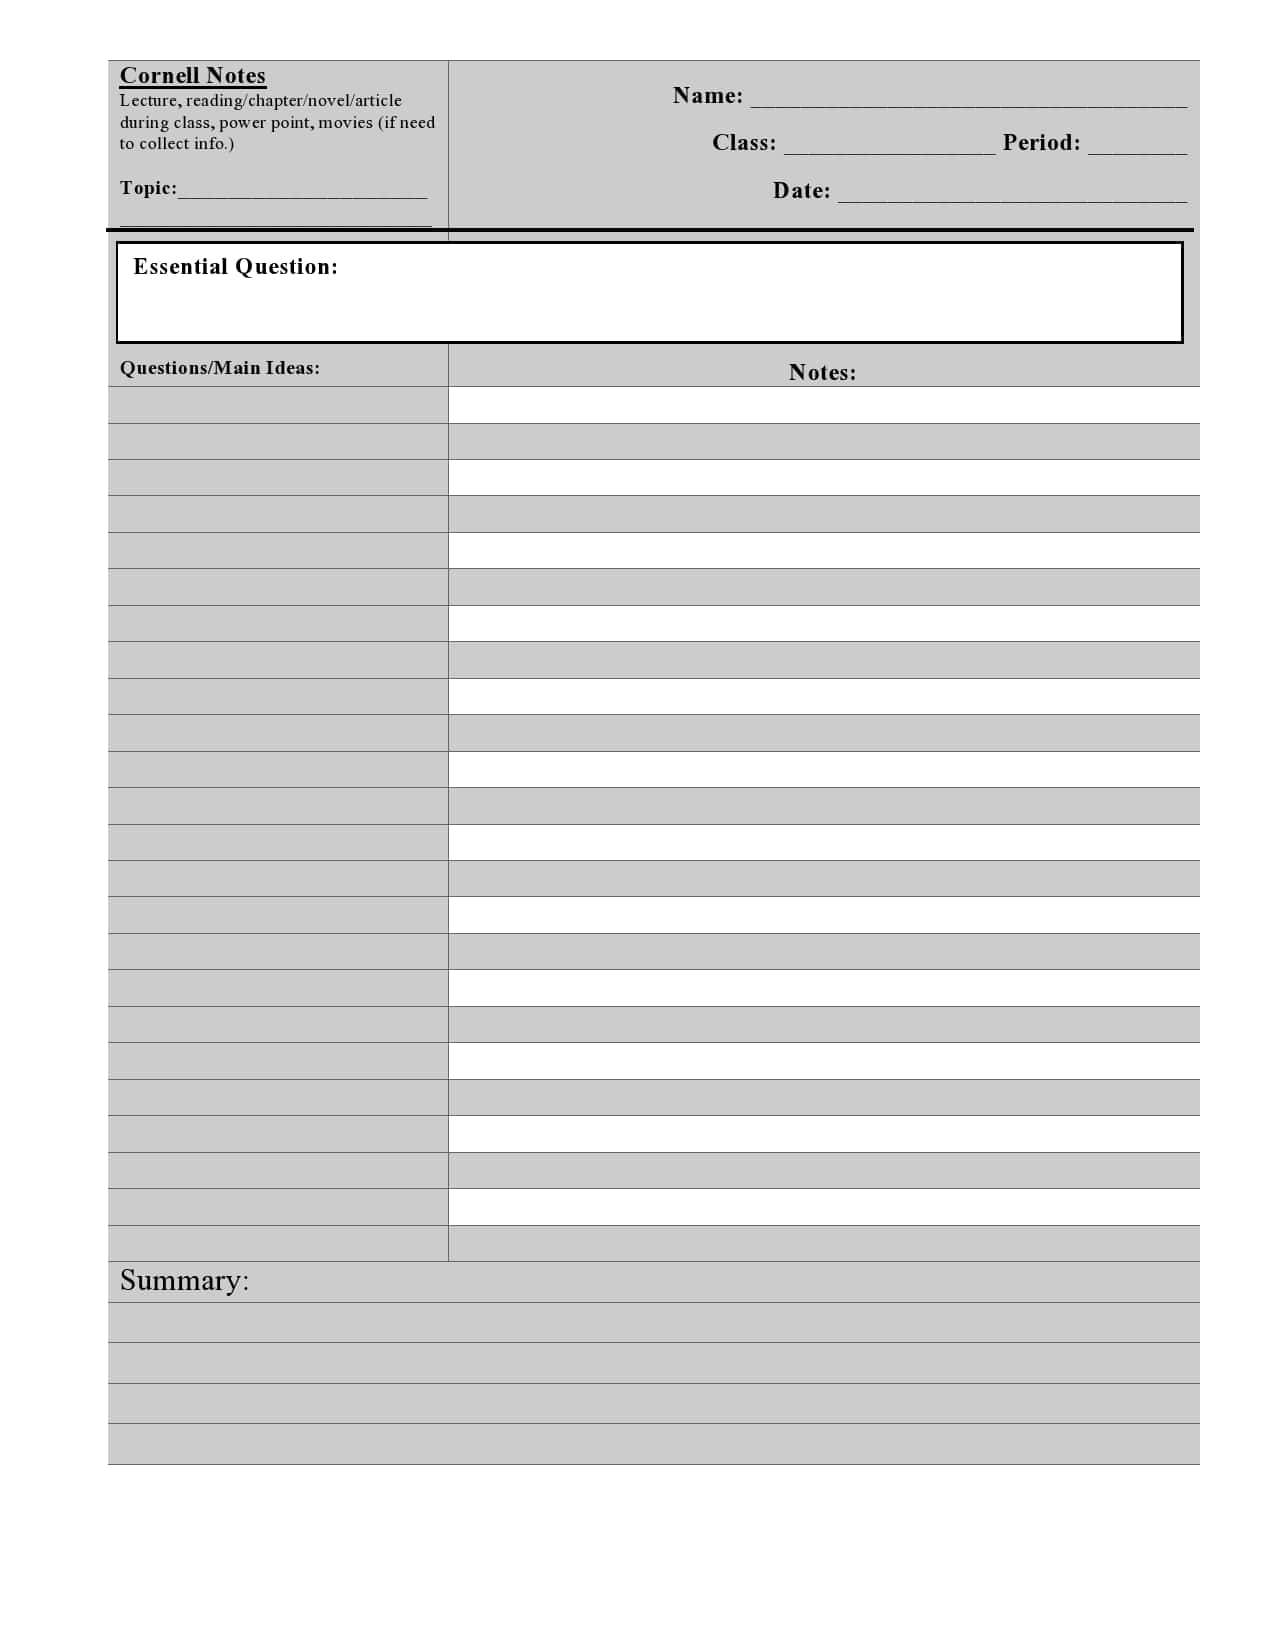 21 Printable Cornell Notes Templates [Free] - TemplateArchive Pertaining To Cornell Note Template Word